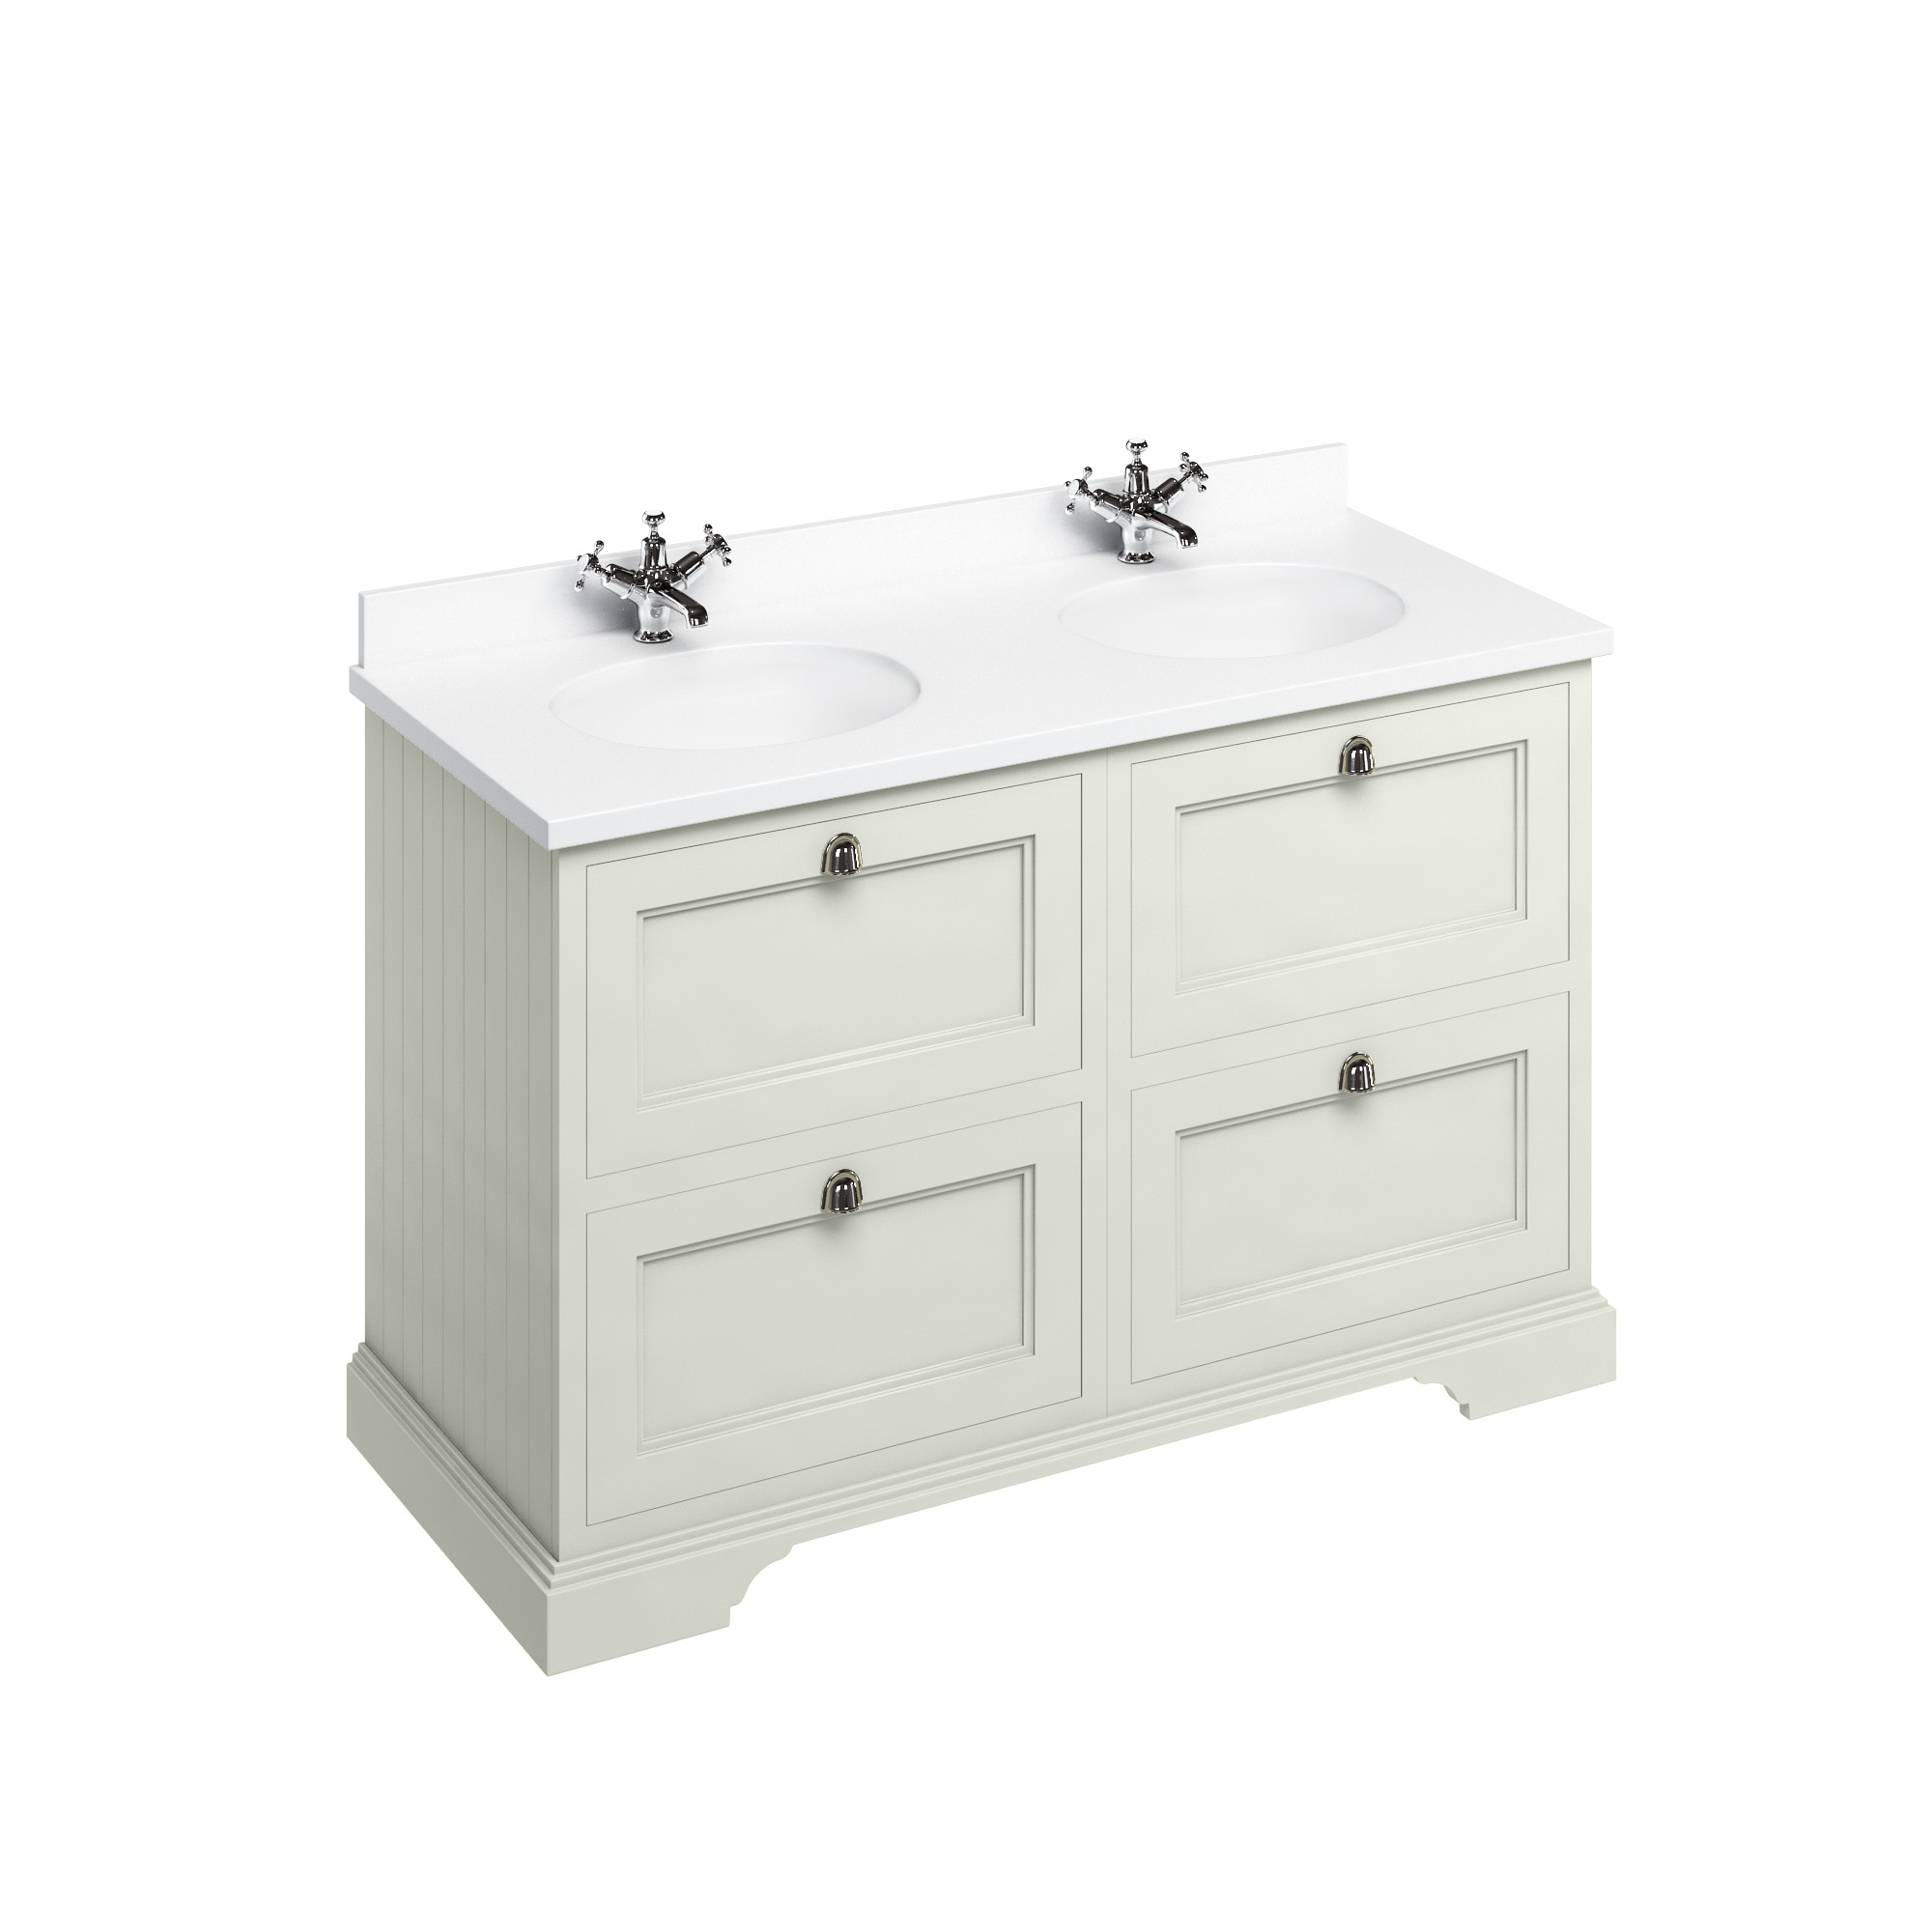 Freestanding 130 Vanity Unit with drawers - Sand and Minerva white worktop with two integrated white basins